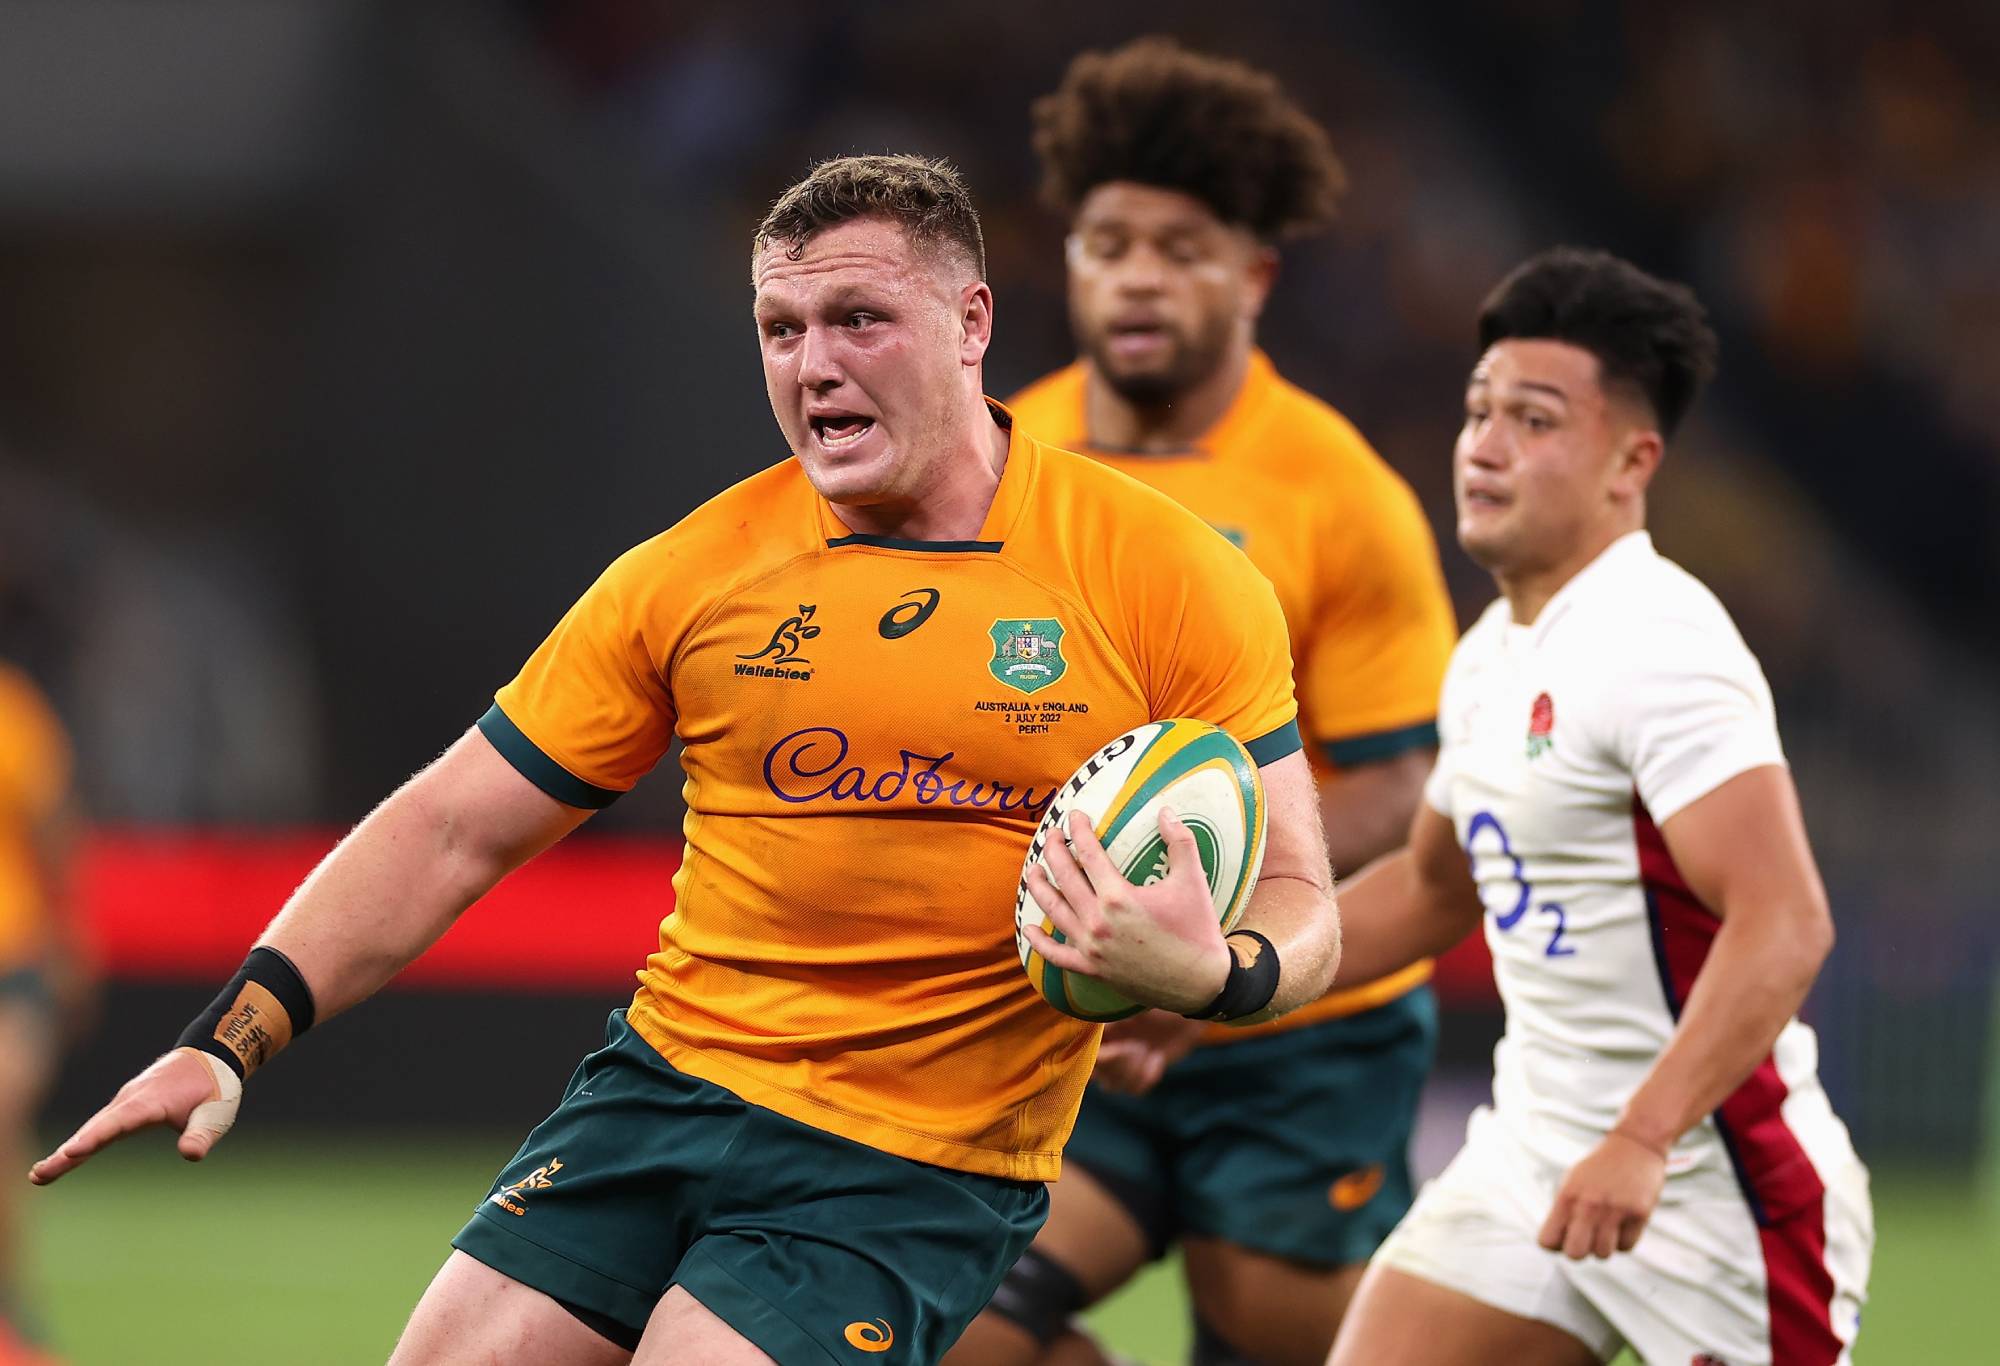 Angus Bell of the Wallabies makes a break during game one of the international test match series between the Australian Wallabies and England at Optus Stadium on July 02, 2022 in Perth, Australia. (Photo by Cameron Spencer/Getty Images)